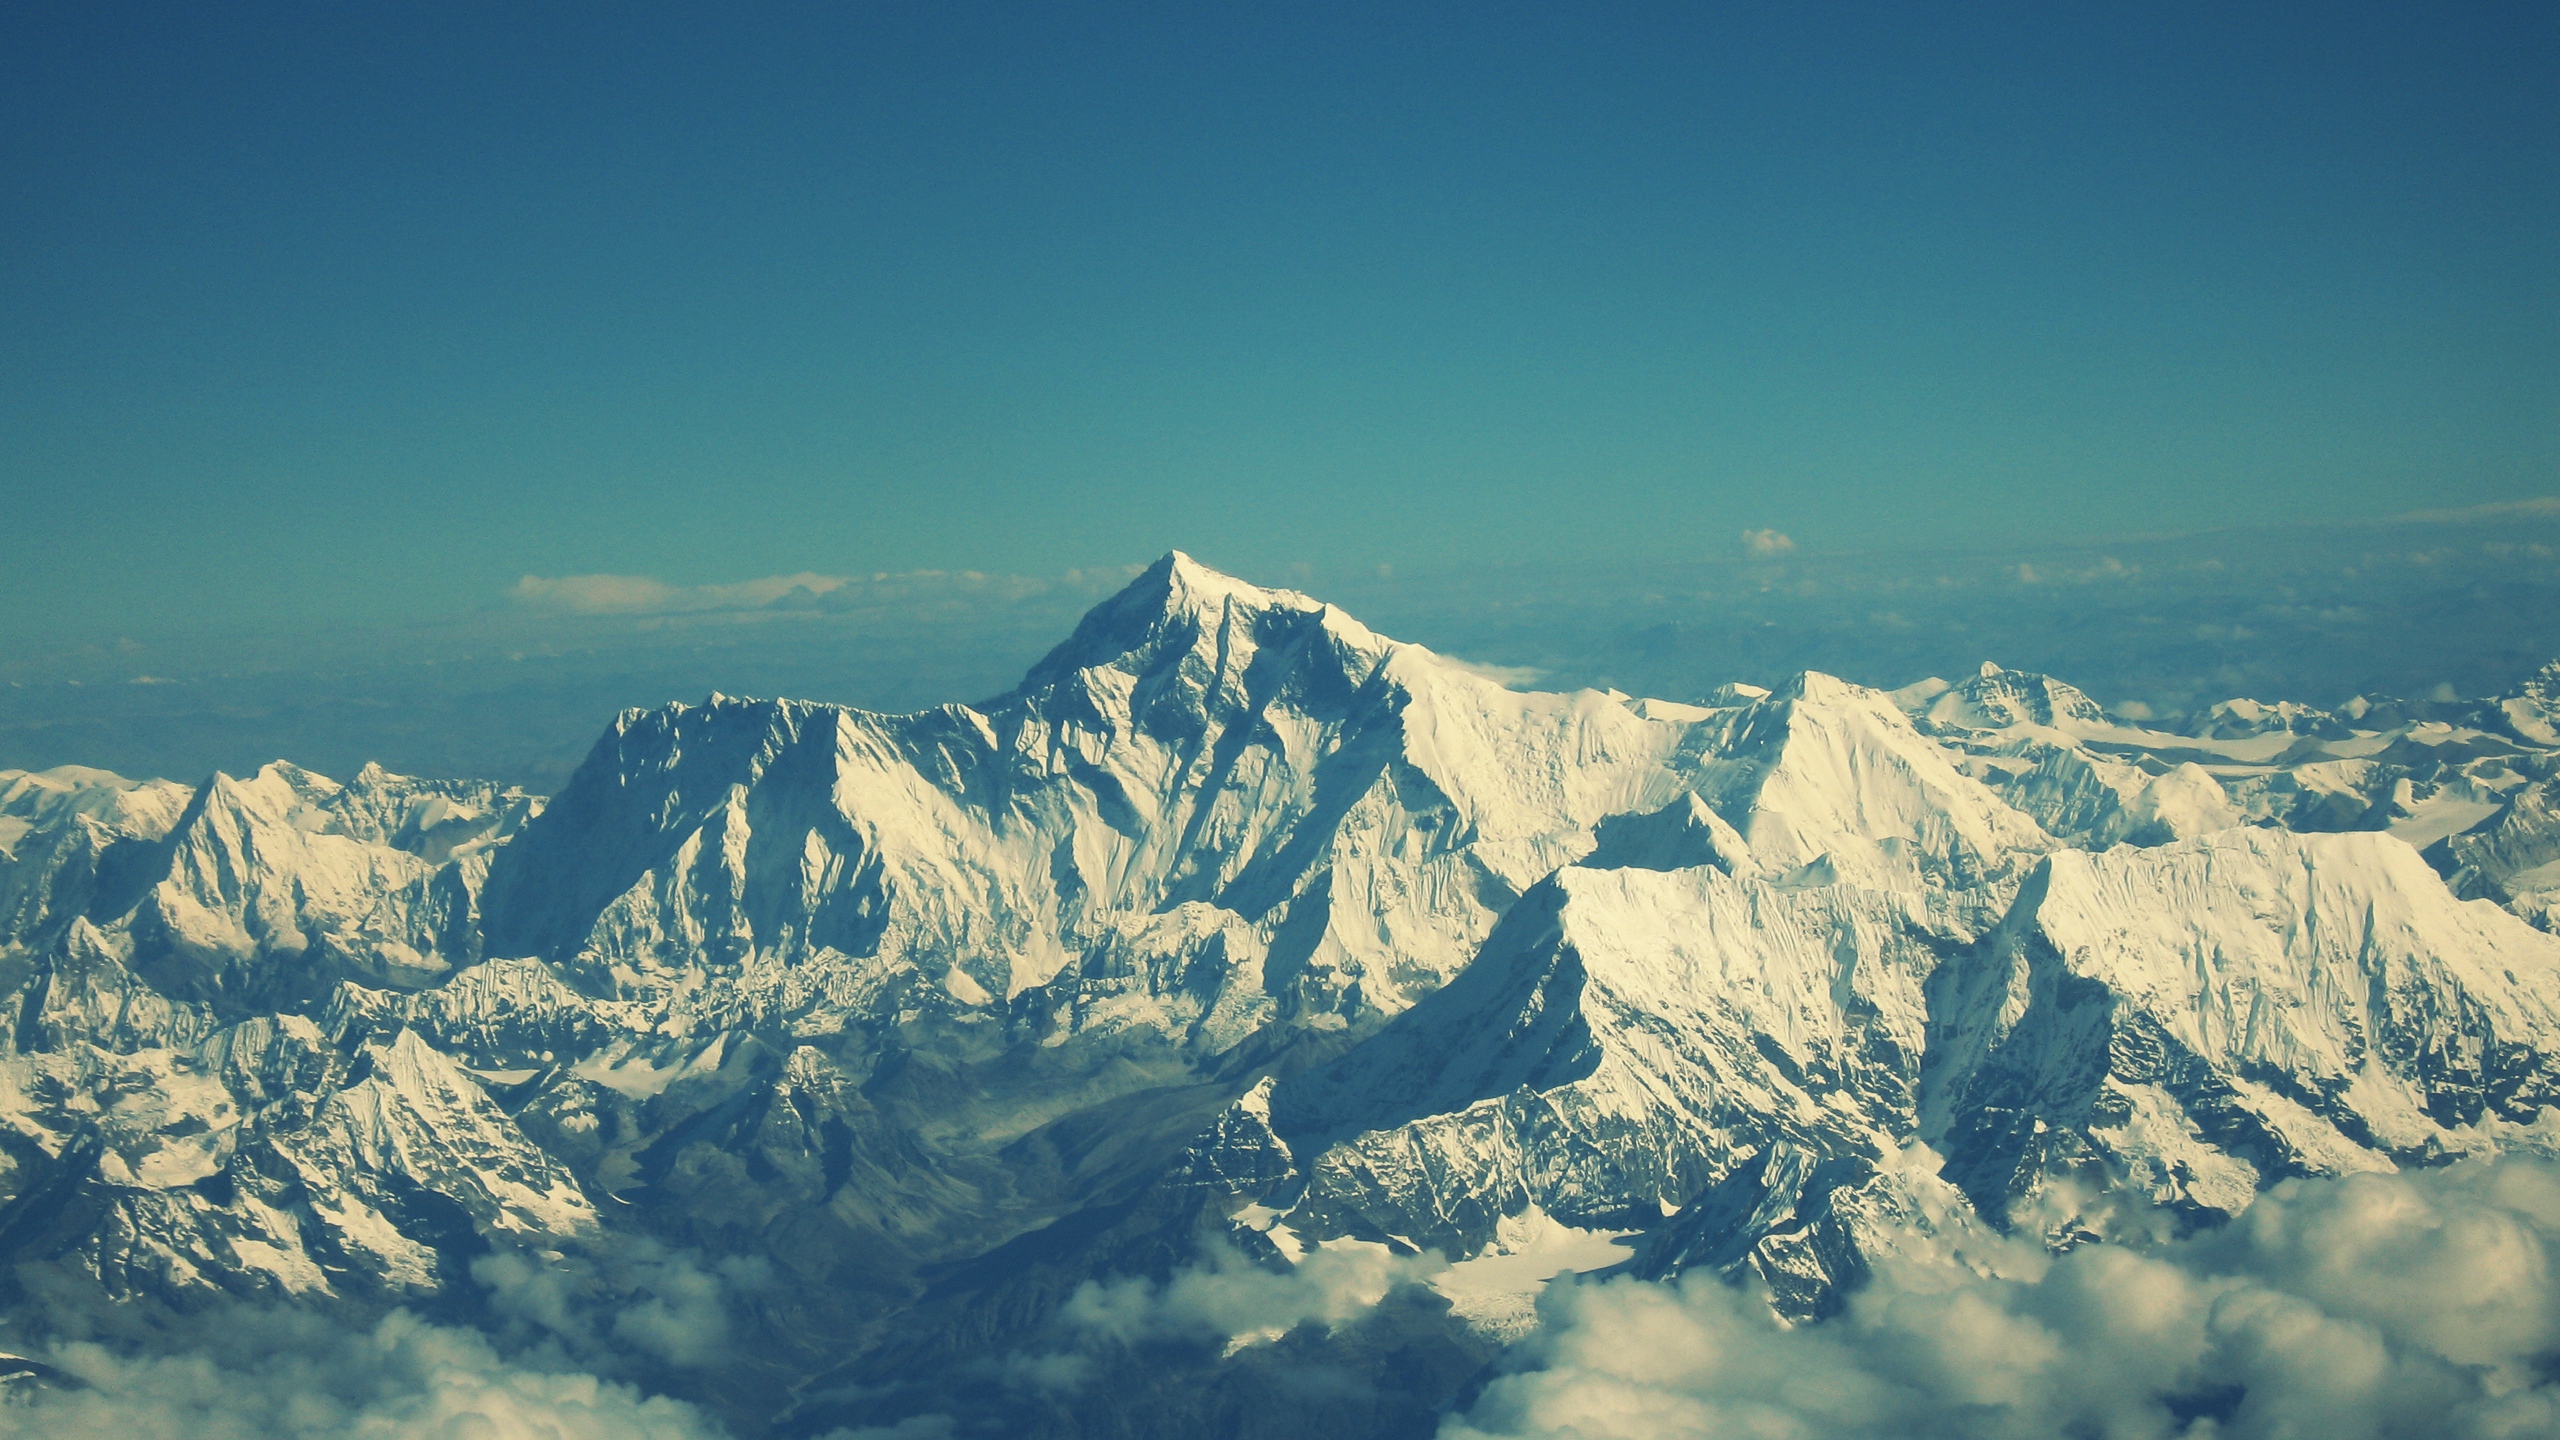 Mountains Mount Everest Sky Clouds Blue 2560x1440